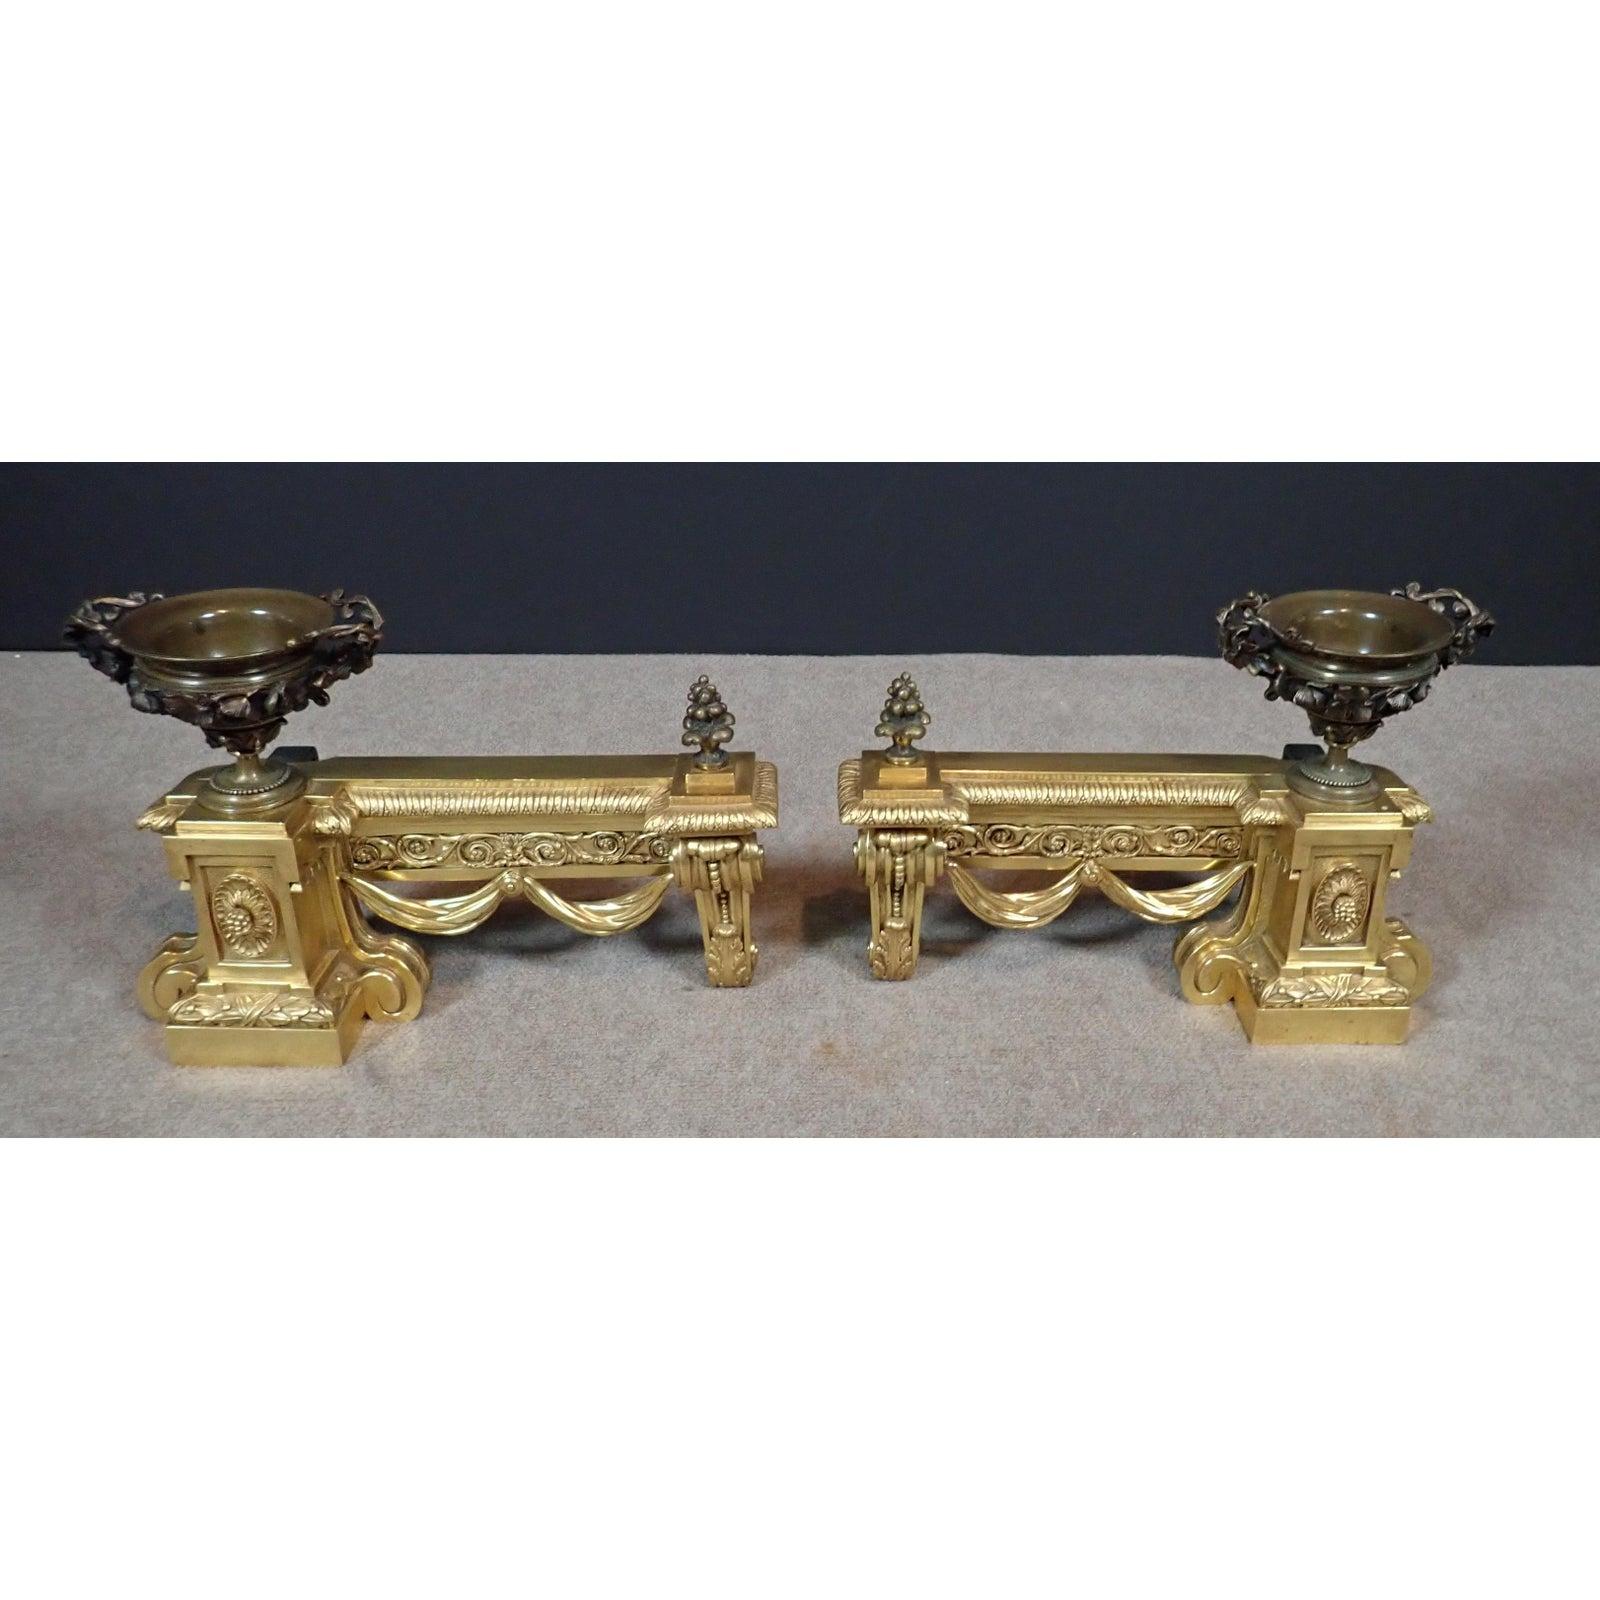 A pair of Louis XVI style gilt and patinated bronze Chenets/Andirons. Fine quality pair of 19th century Louis XVI Style French chenets. Doré and patinated bronze. Fine casting. Foundry markings on back.